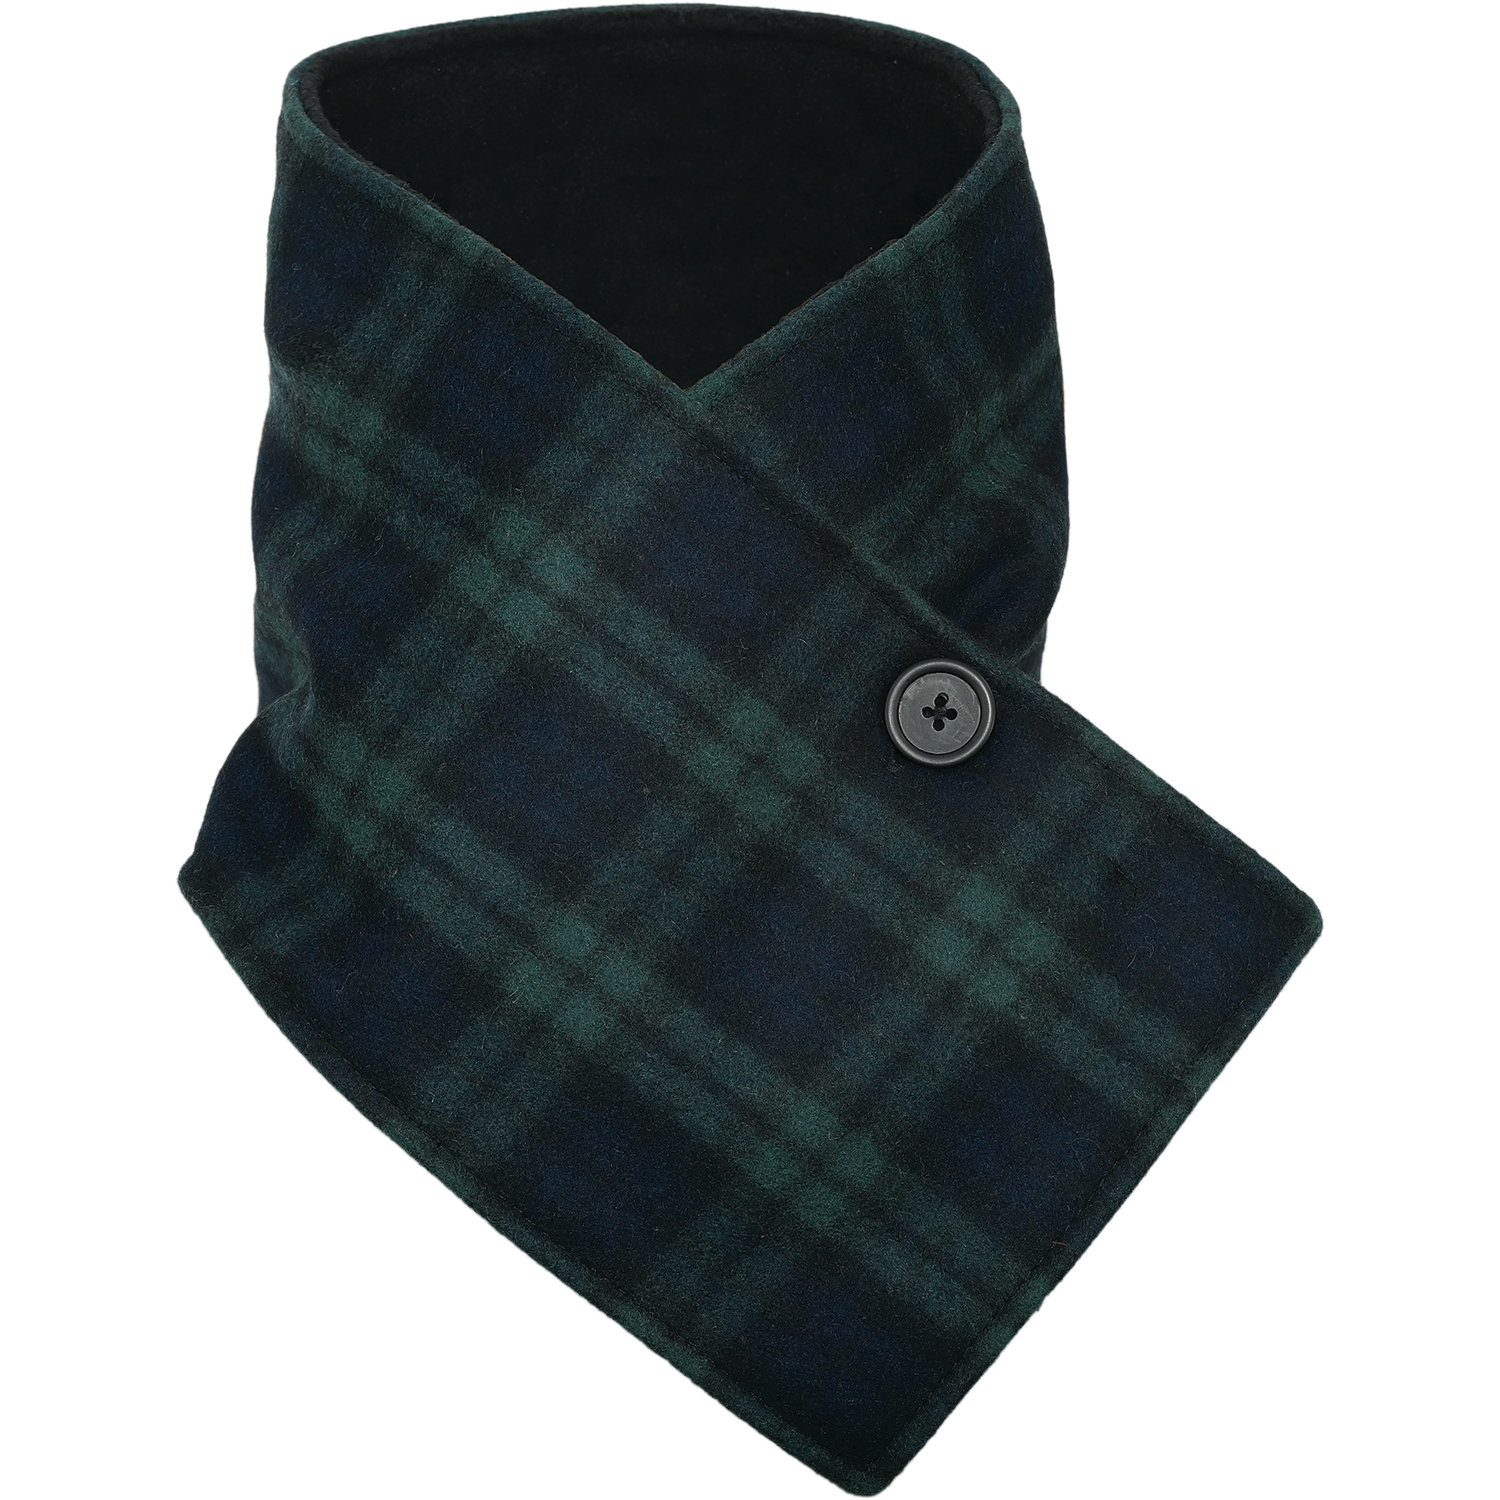 Picture of Stormy Kromer 52720 Button-Up Neck Warmer